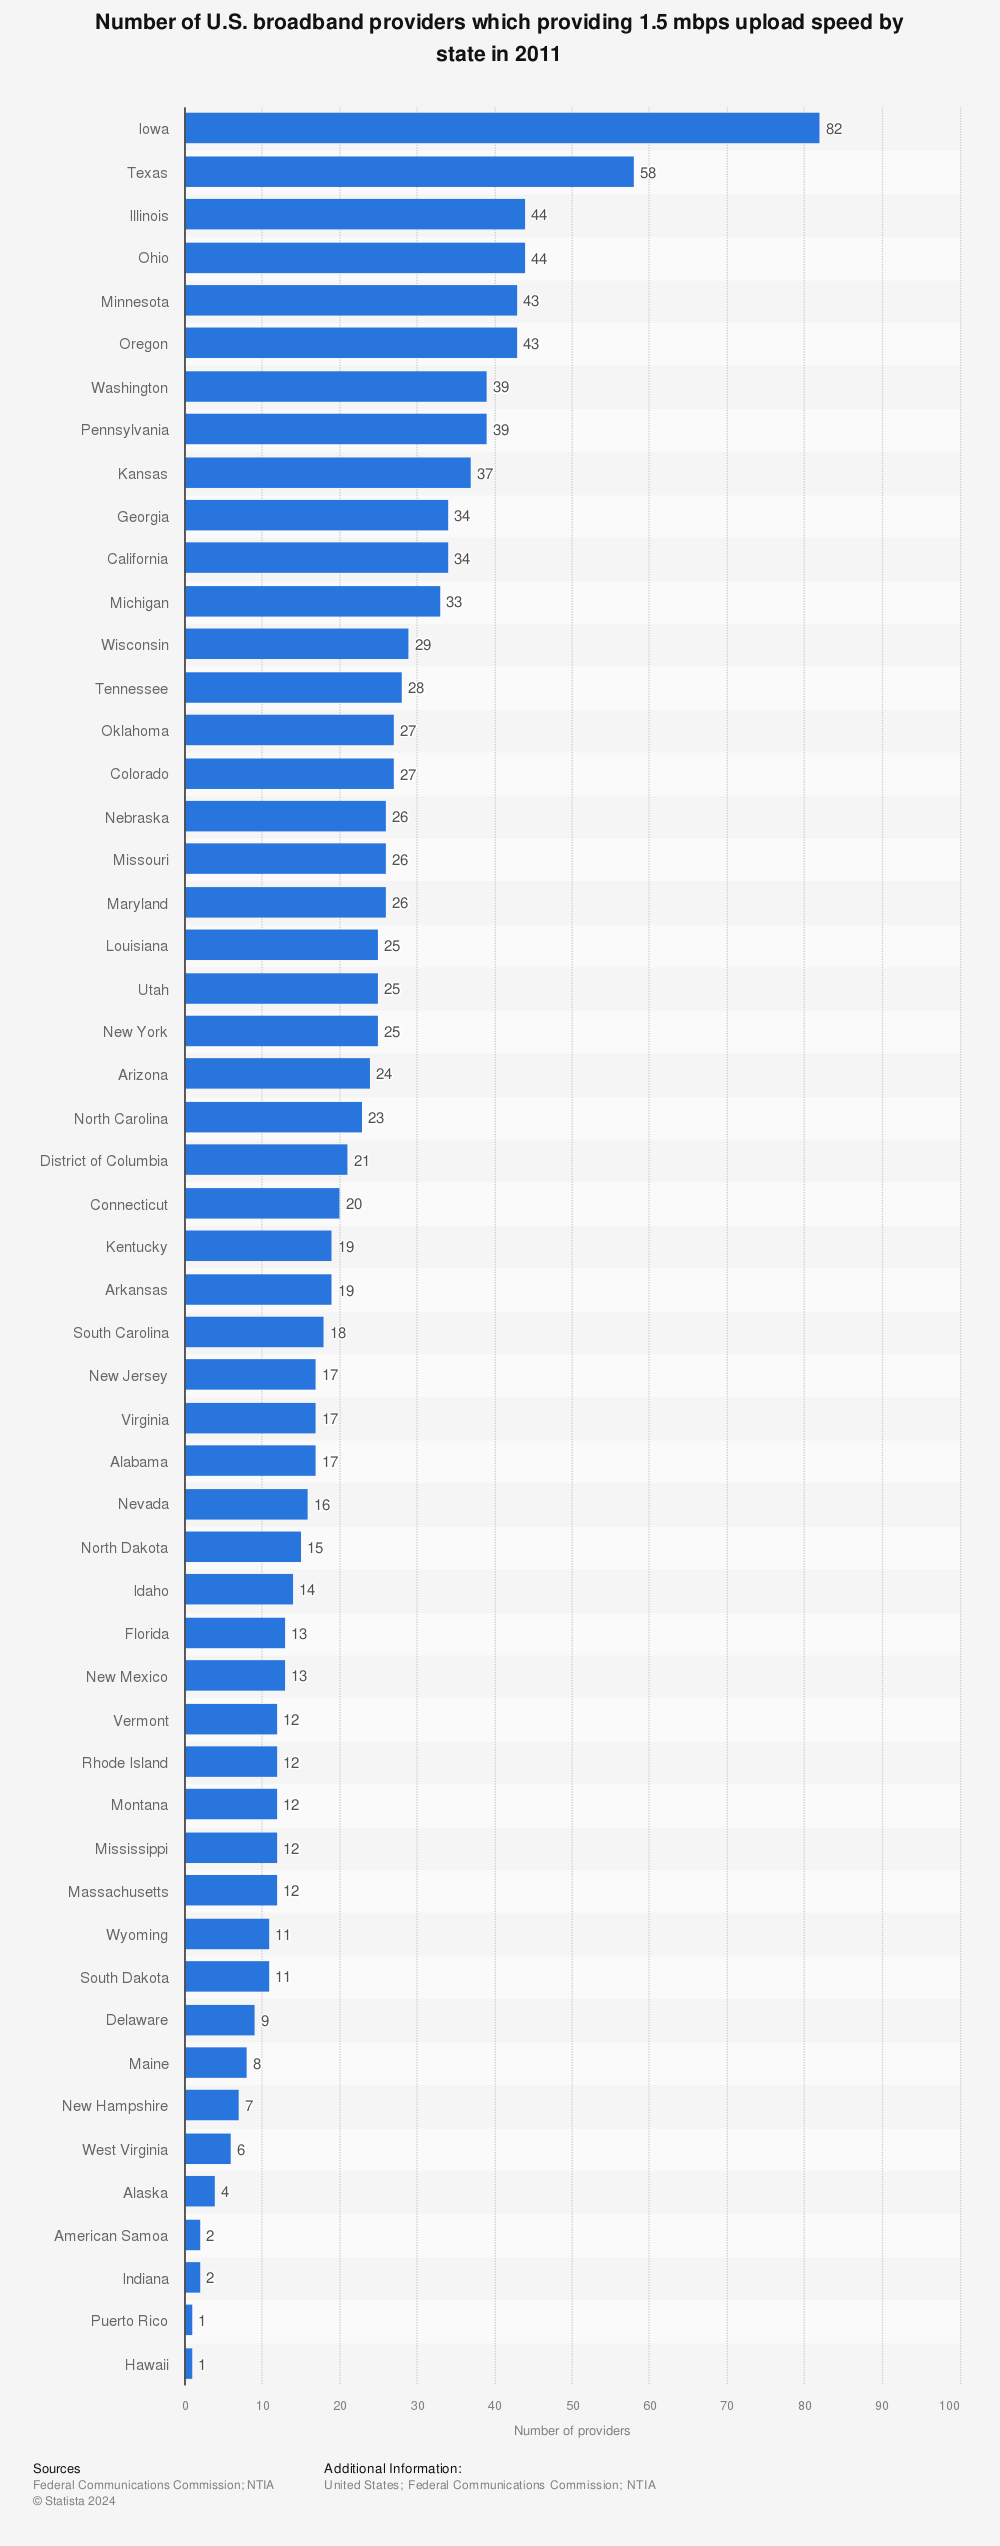 Statistic: Number of U.S. broadband providers which providing 1.5 mbps upload speed by state in 2011 | Statista